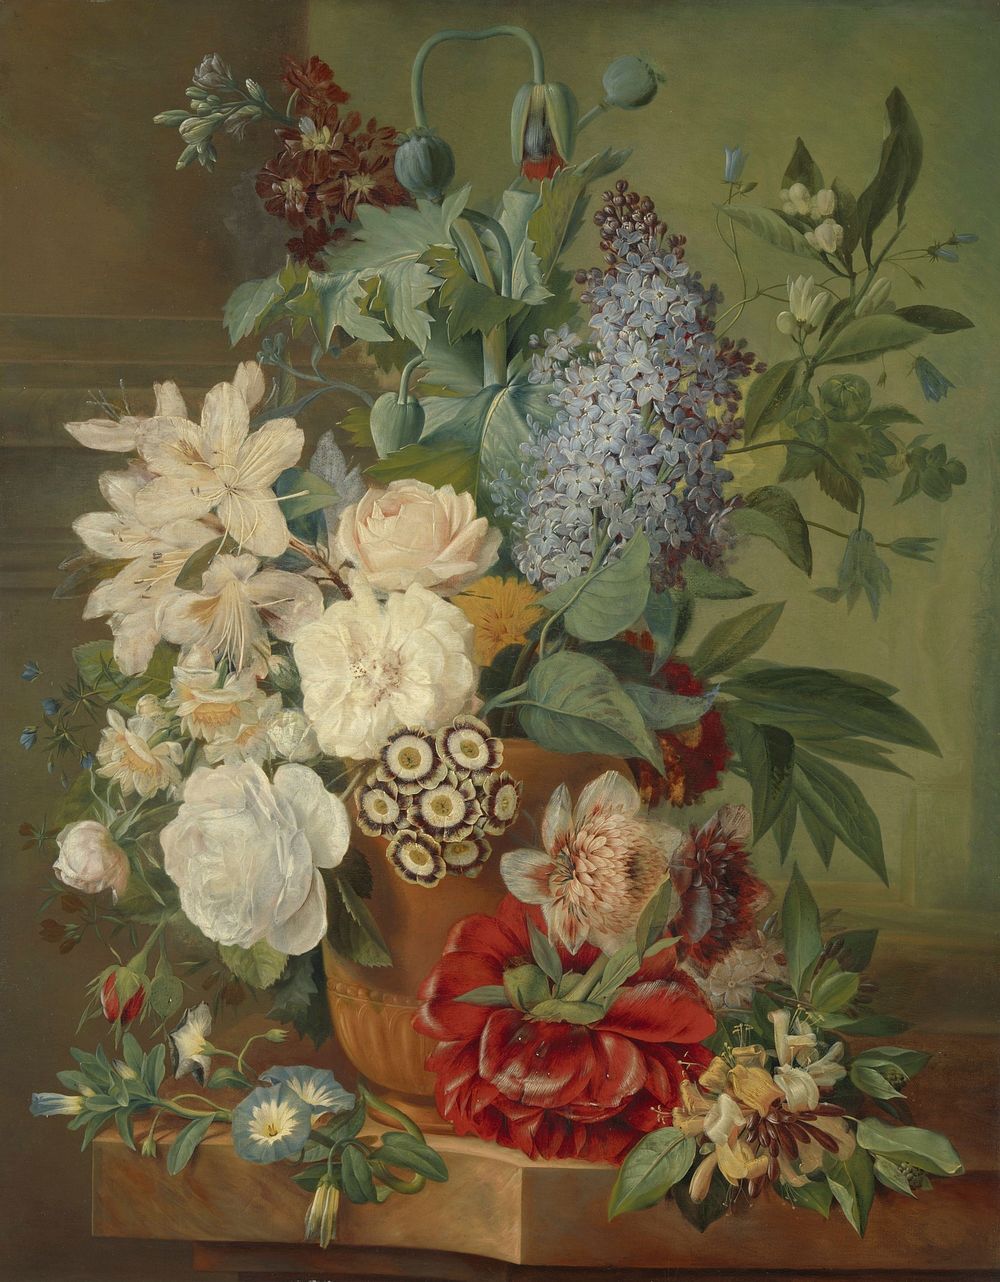 Srill life with flowers in a terracotta vase.